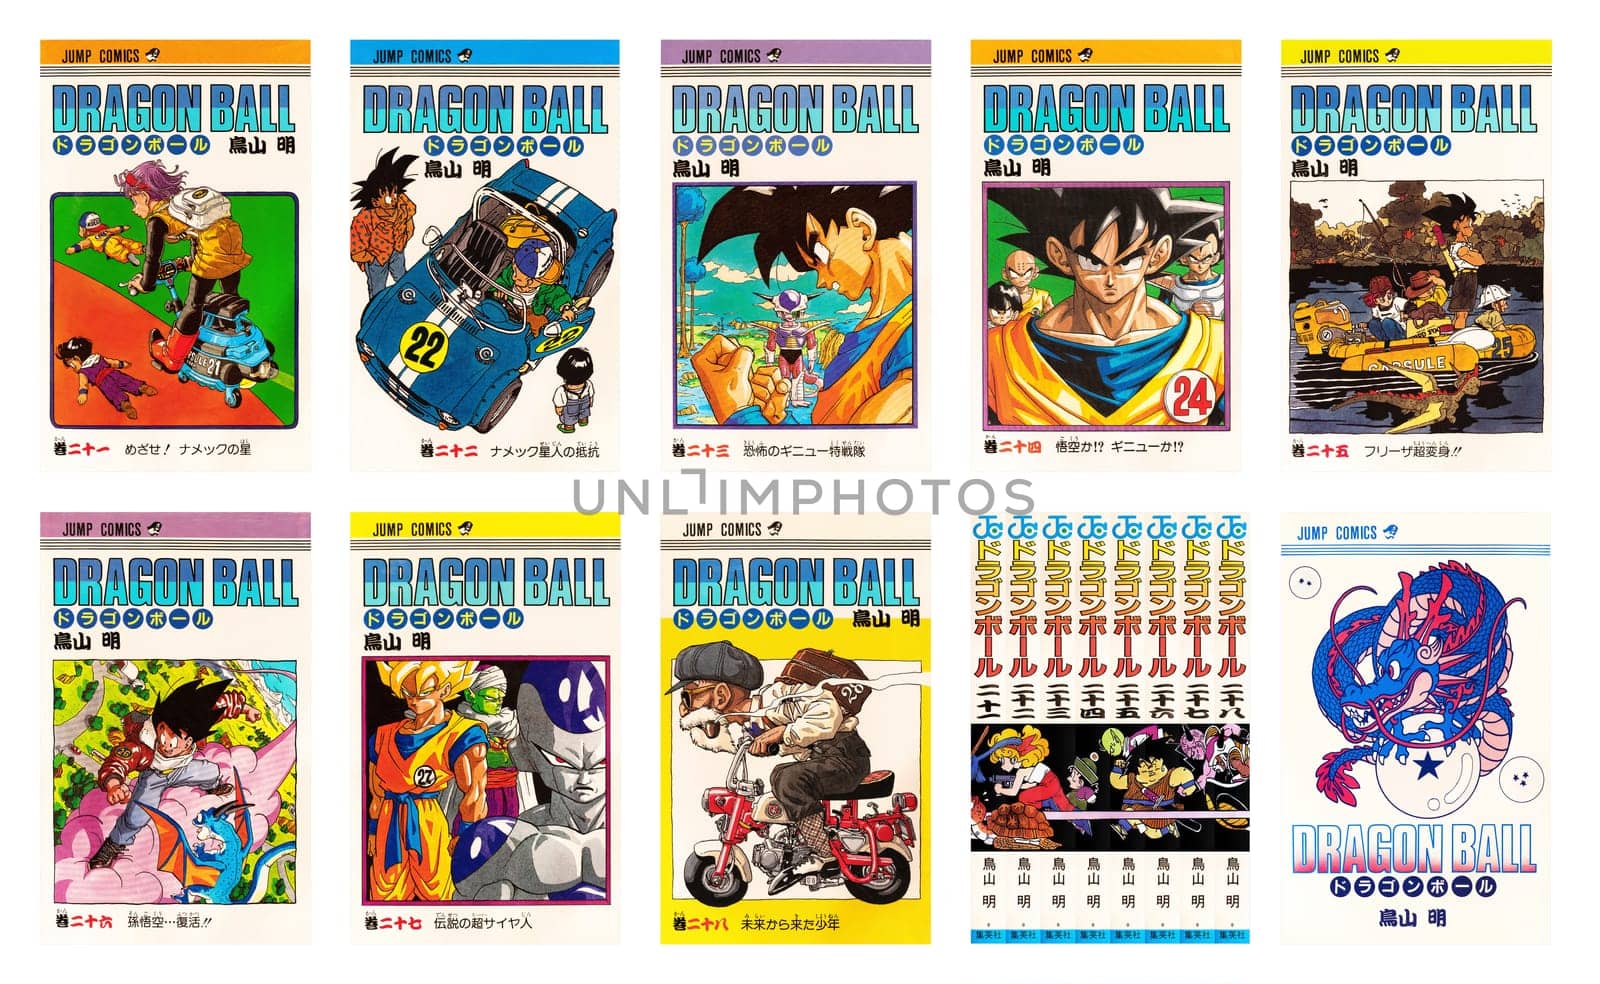 tokyo, japan - apr 10 1990: (set 5/7) First design covers of vol 21 to 28 of Japanese manga Dragon Ball covering Frieza saga on planet Namek created by late artist Akira Toriyama. (from left to right)